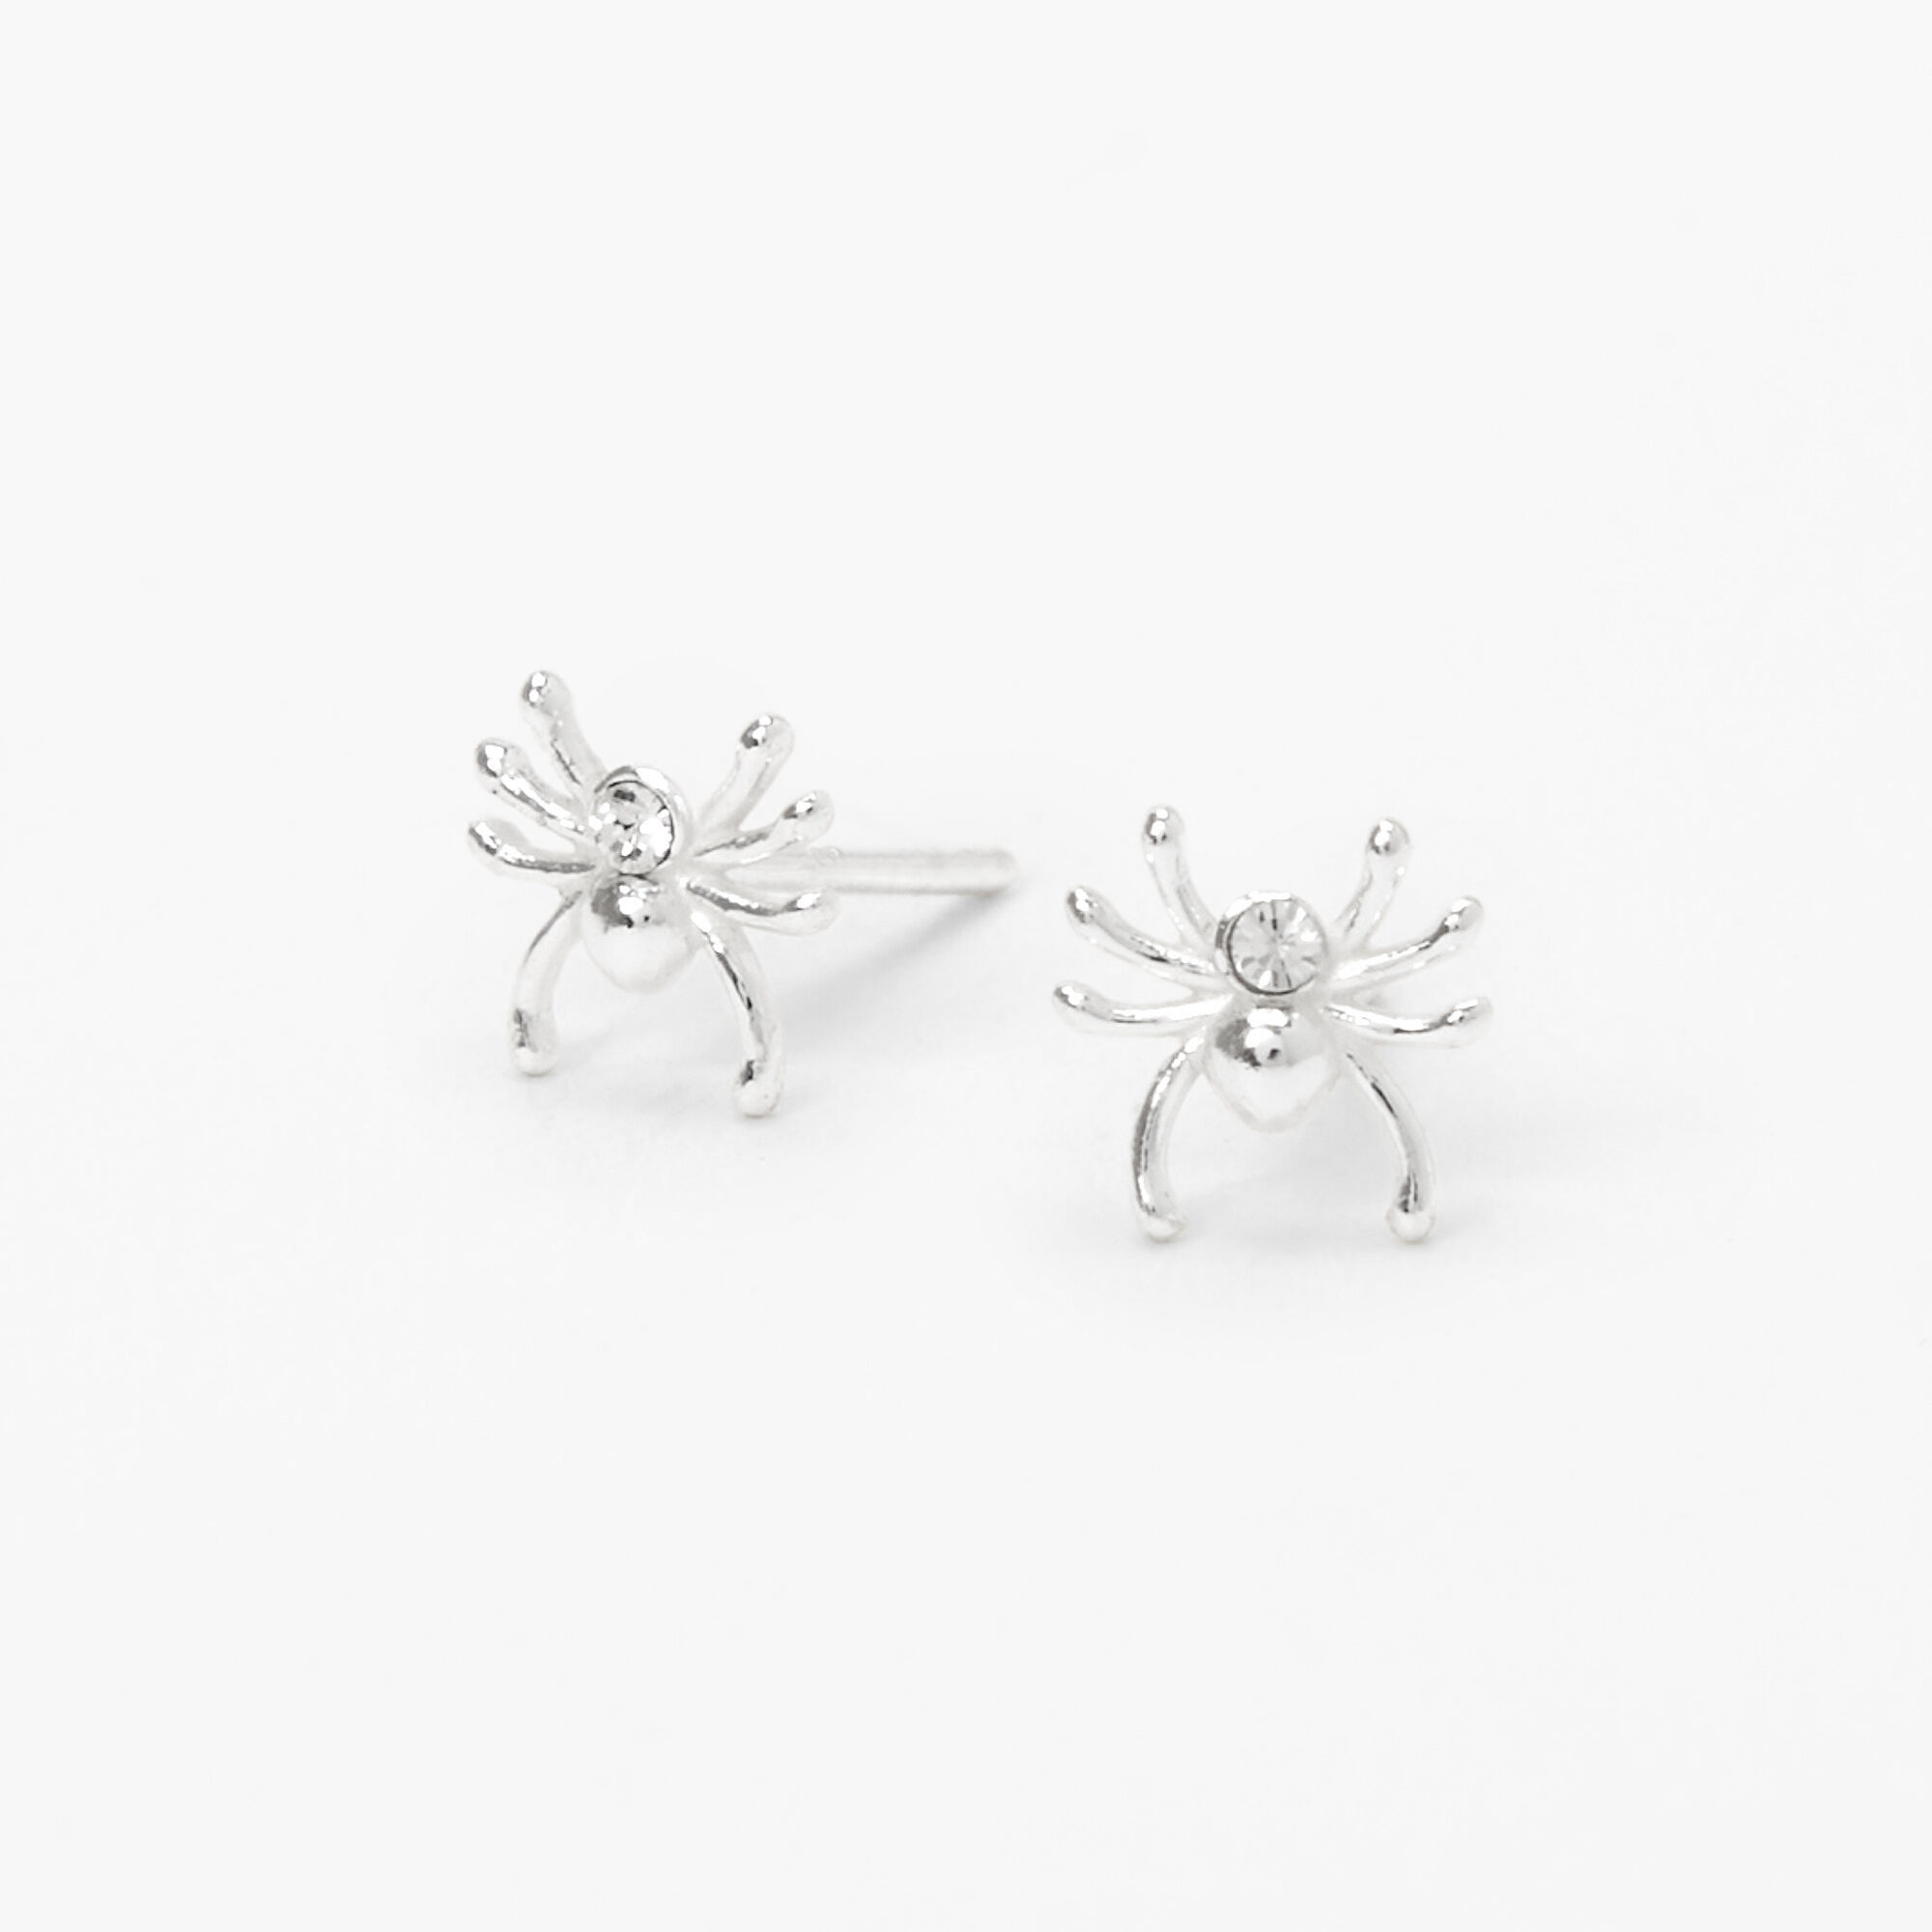 Tiny Sterling Silver Spider Stud Earrings 5/16 inch